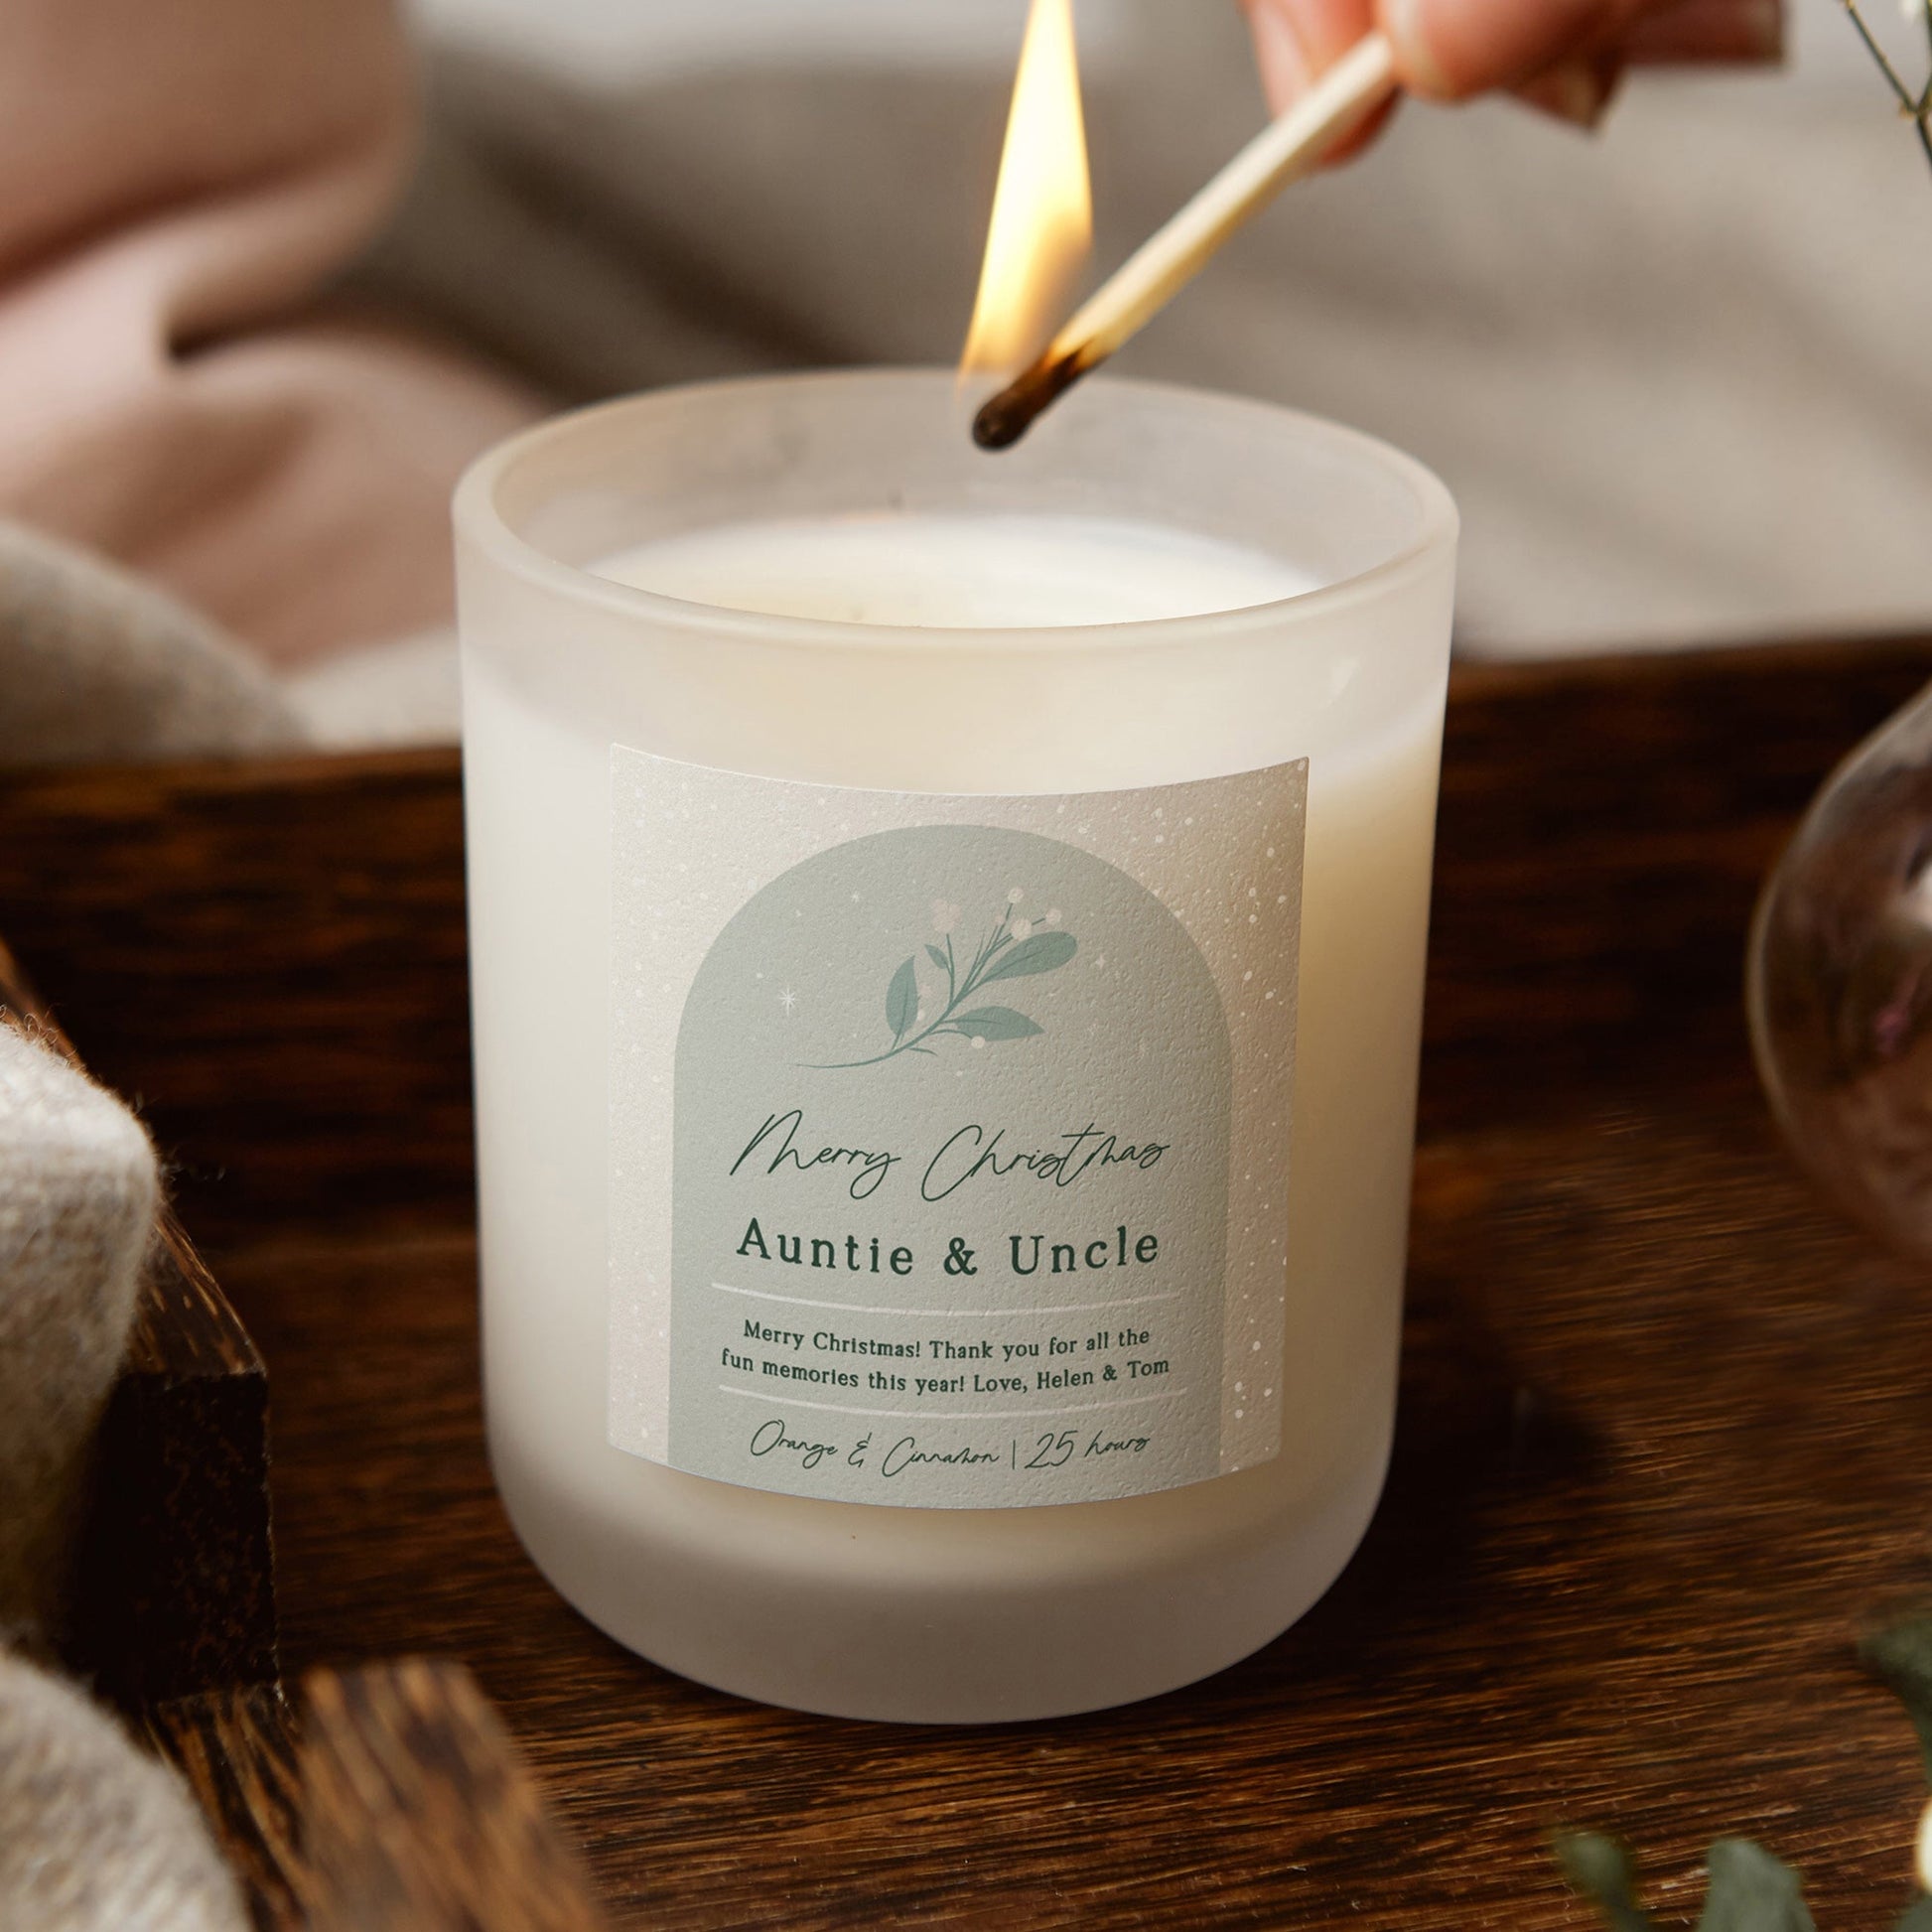 Auntie and Uncle Gift Christmas Candle Botanical - Kindred Fires